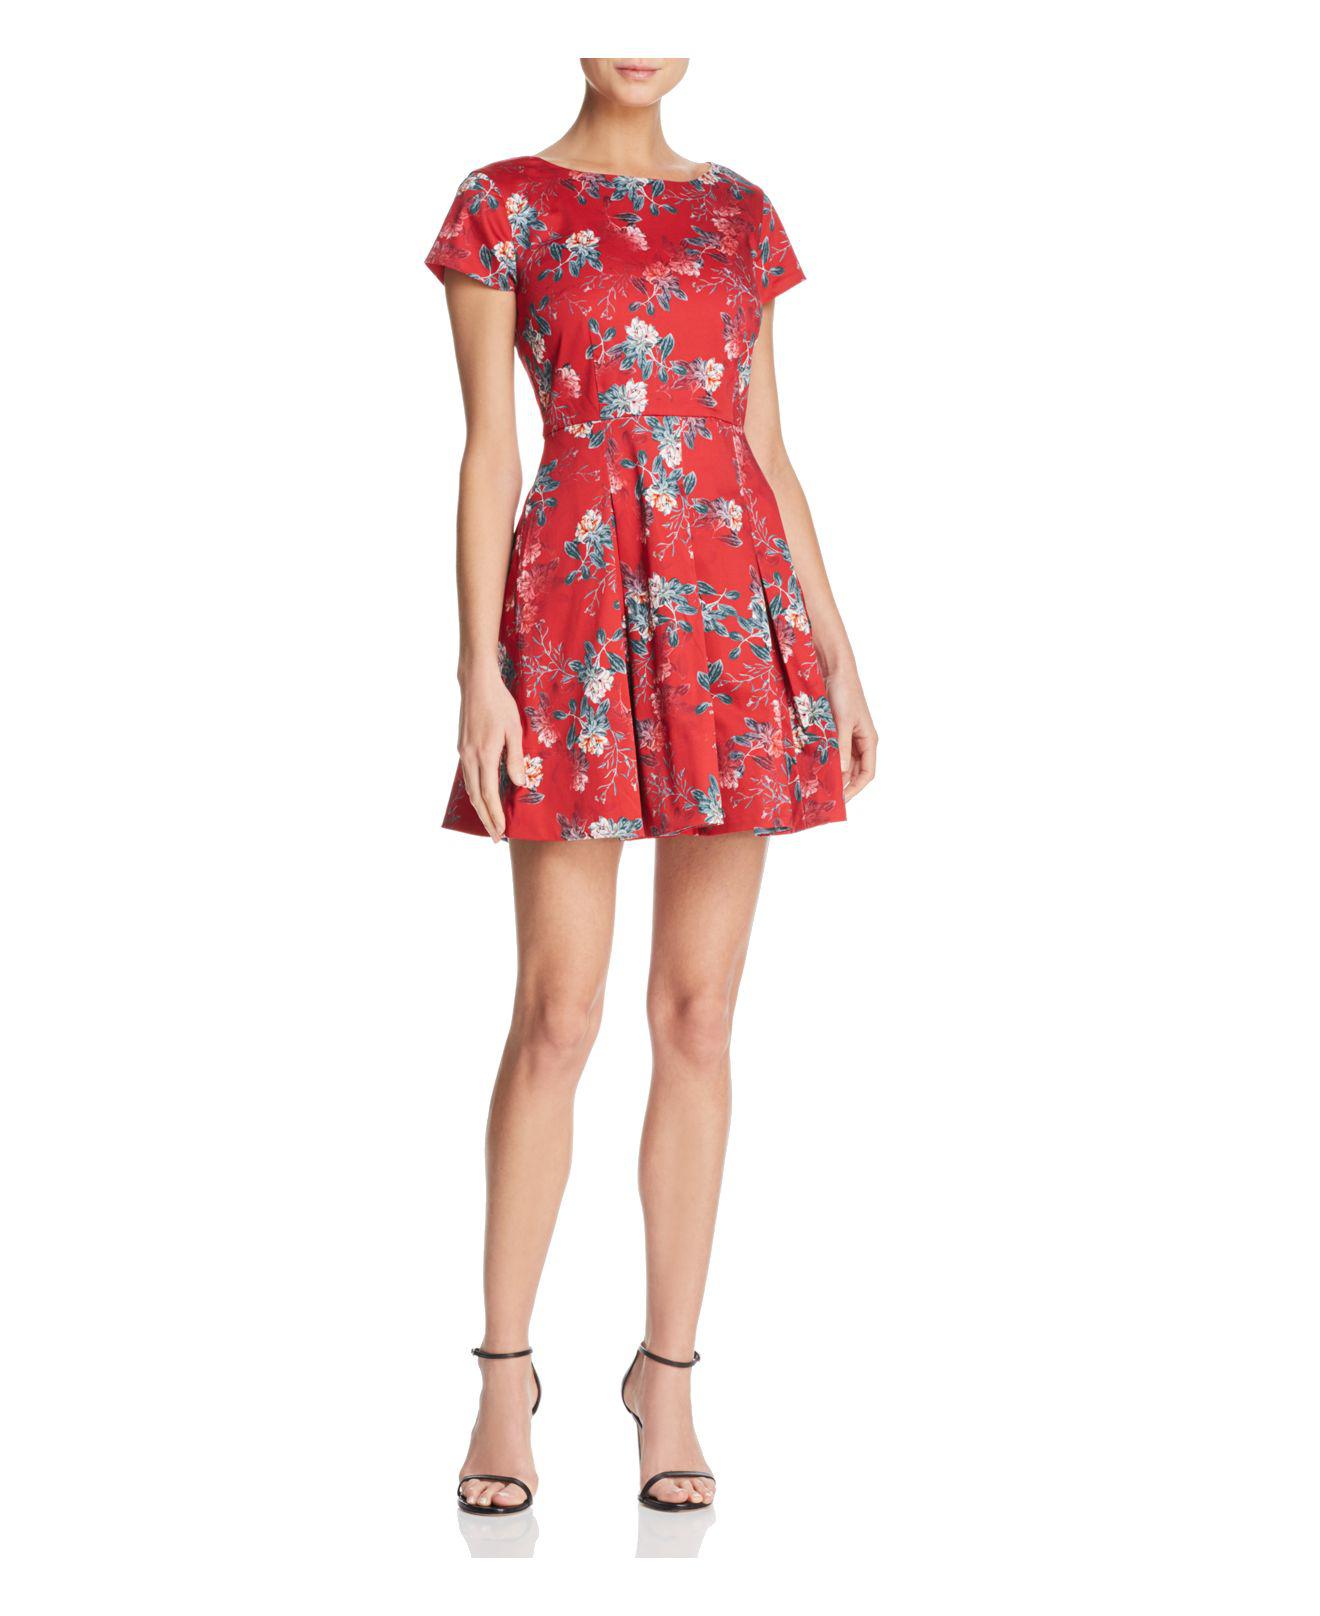 French Connection Red Floral Dress Best ...